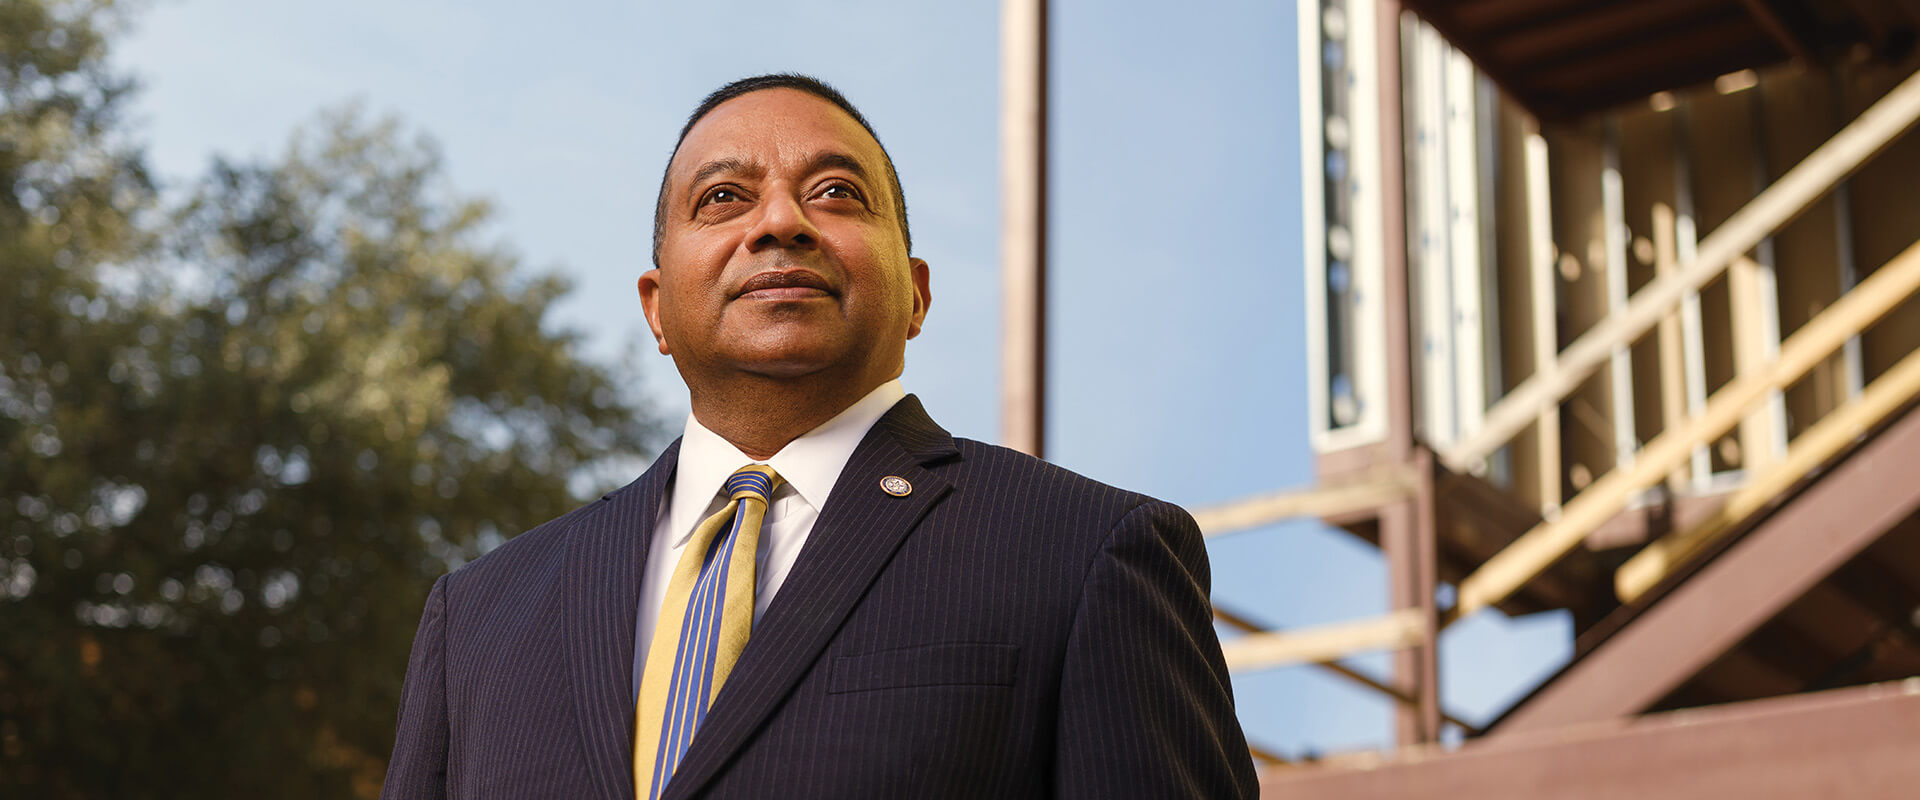 Winston Erevelles, Ph.D., was selected as the 14th president of St. Mary's University.